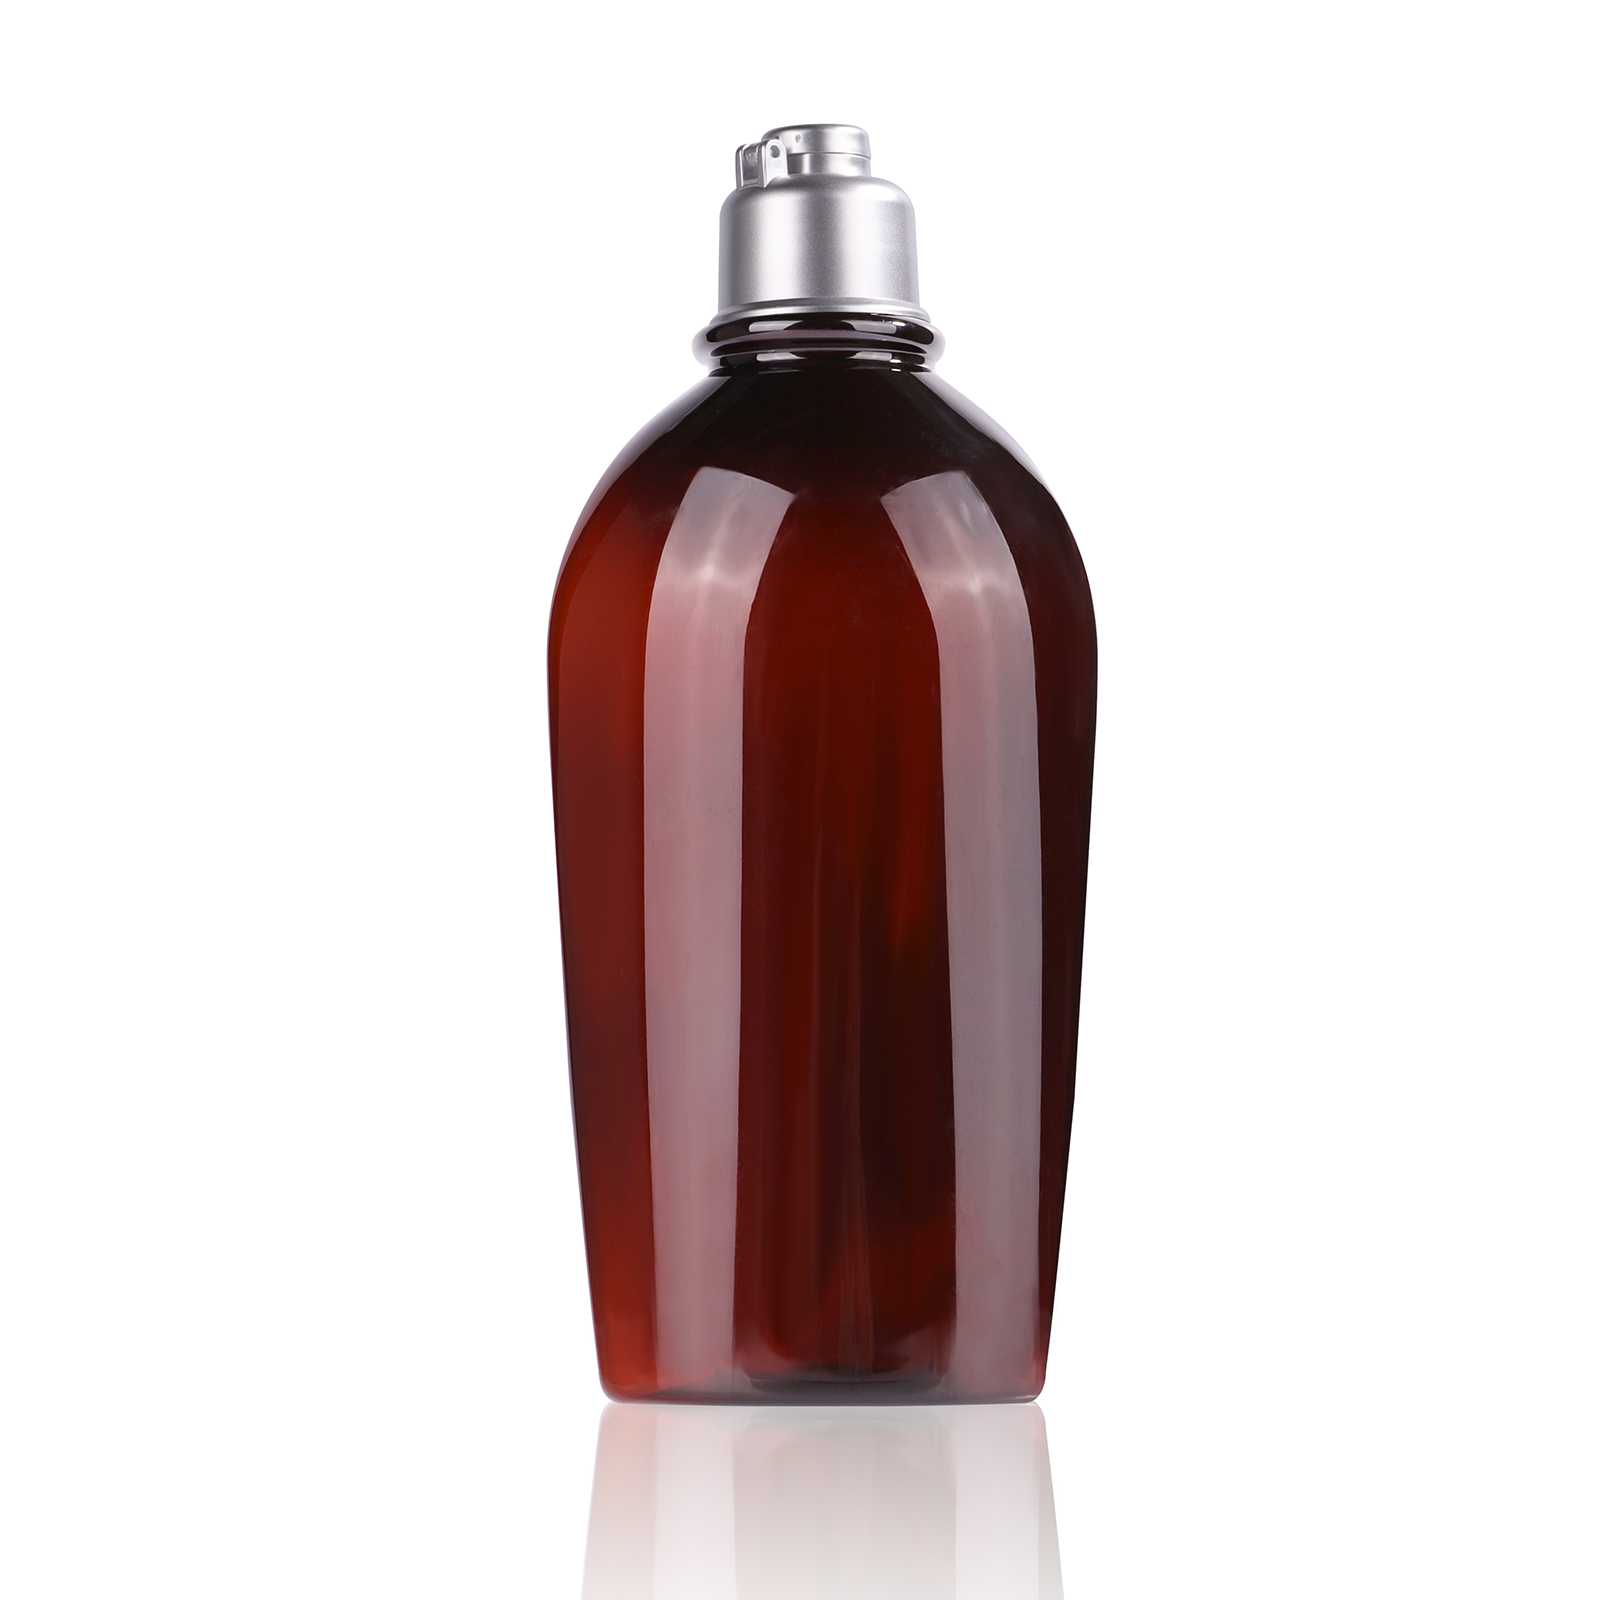 Factory 300ml/ gel bottle/ lotion bottle/ makeup remover bottle can be equipped with pressure pump or lid. Color customized